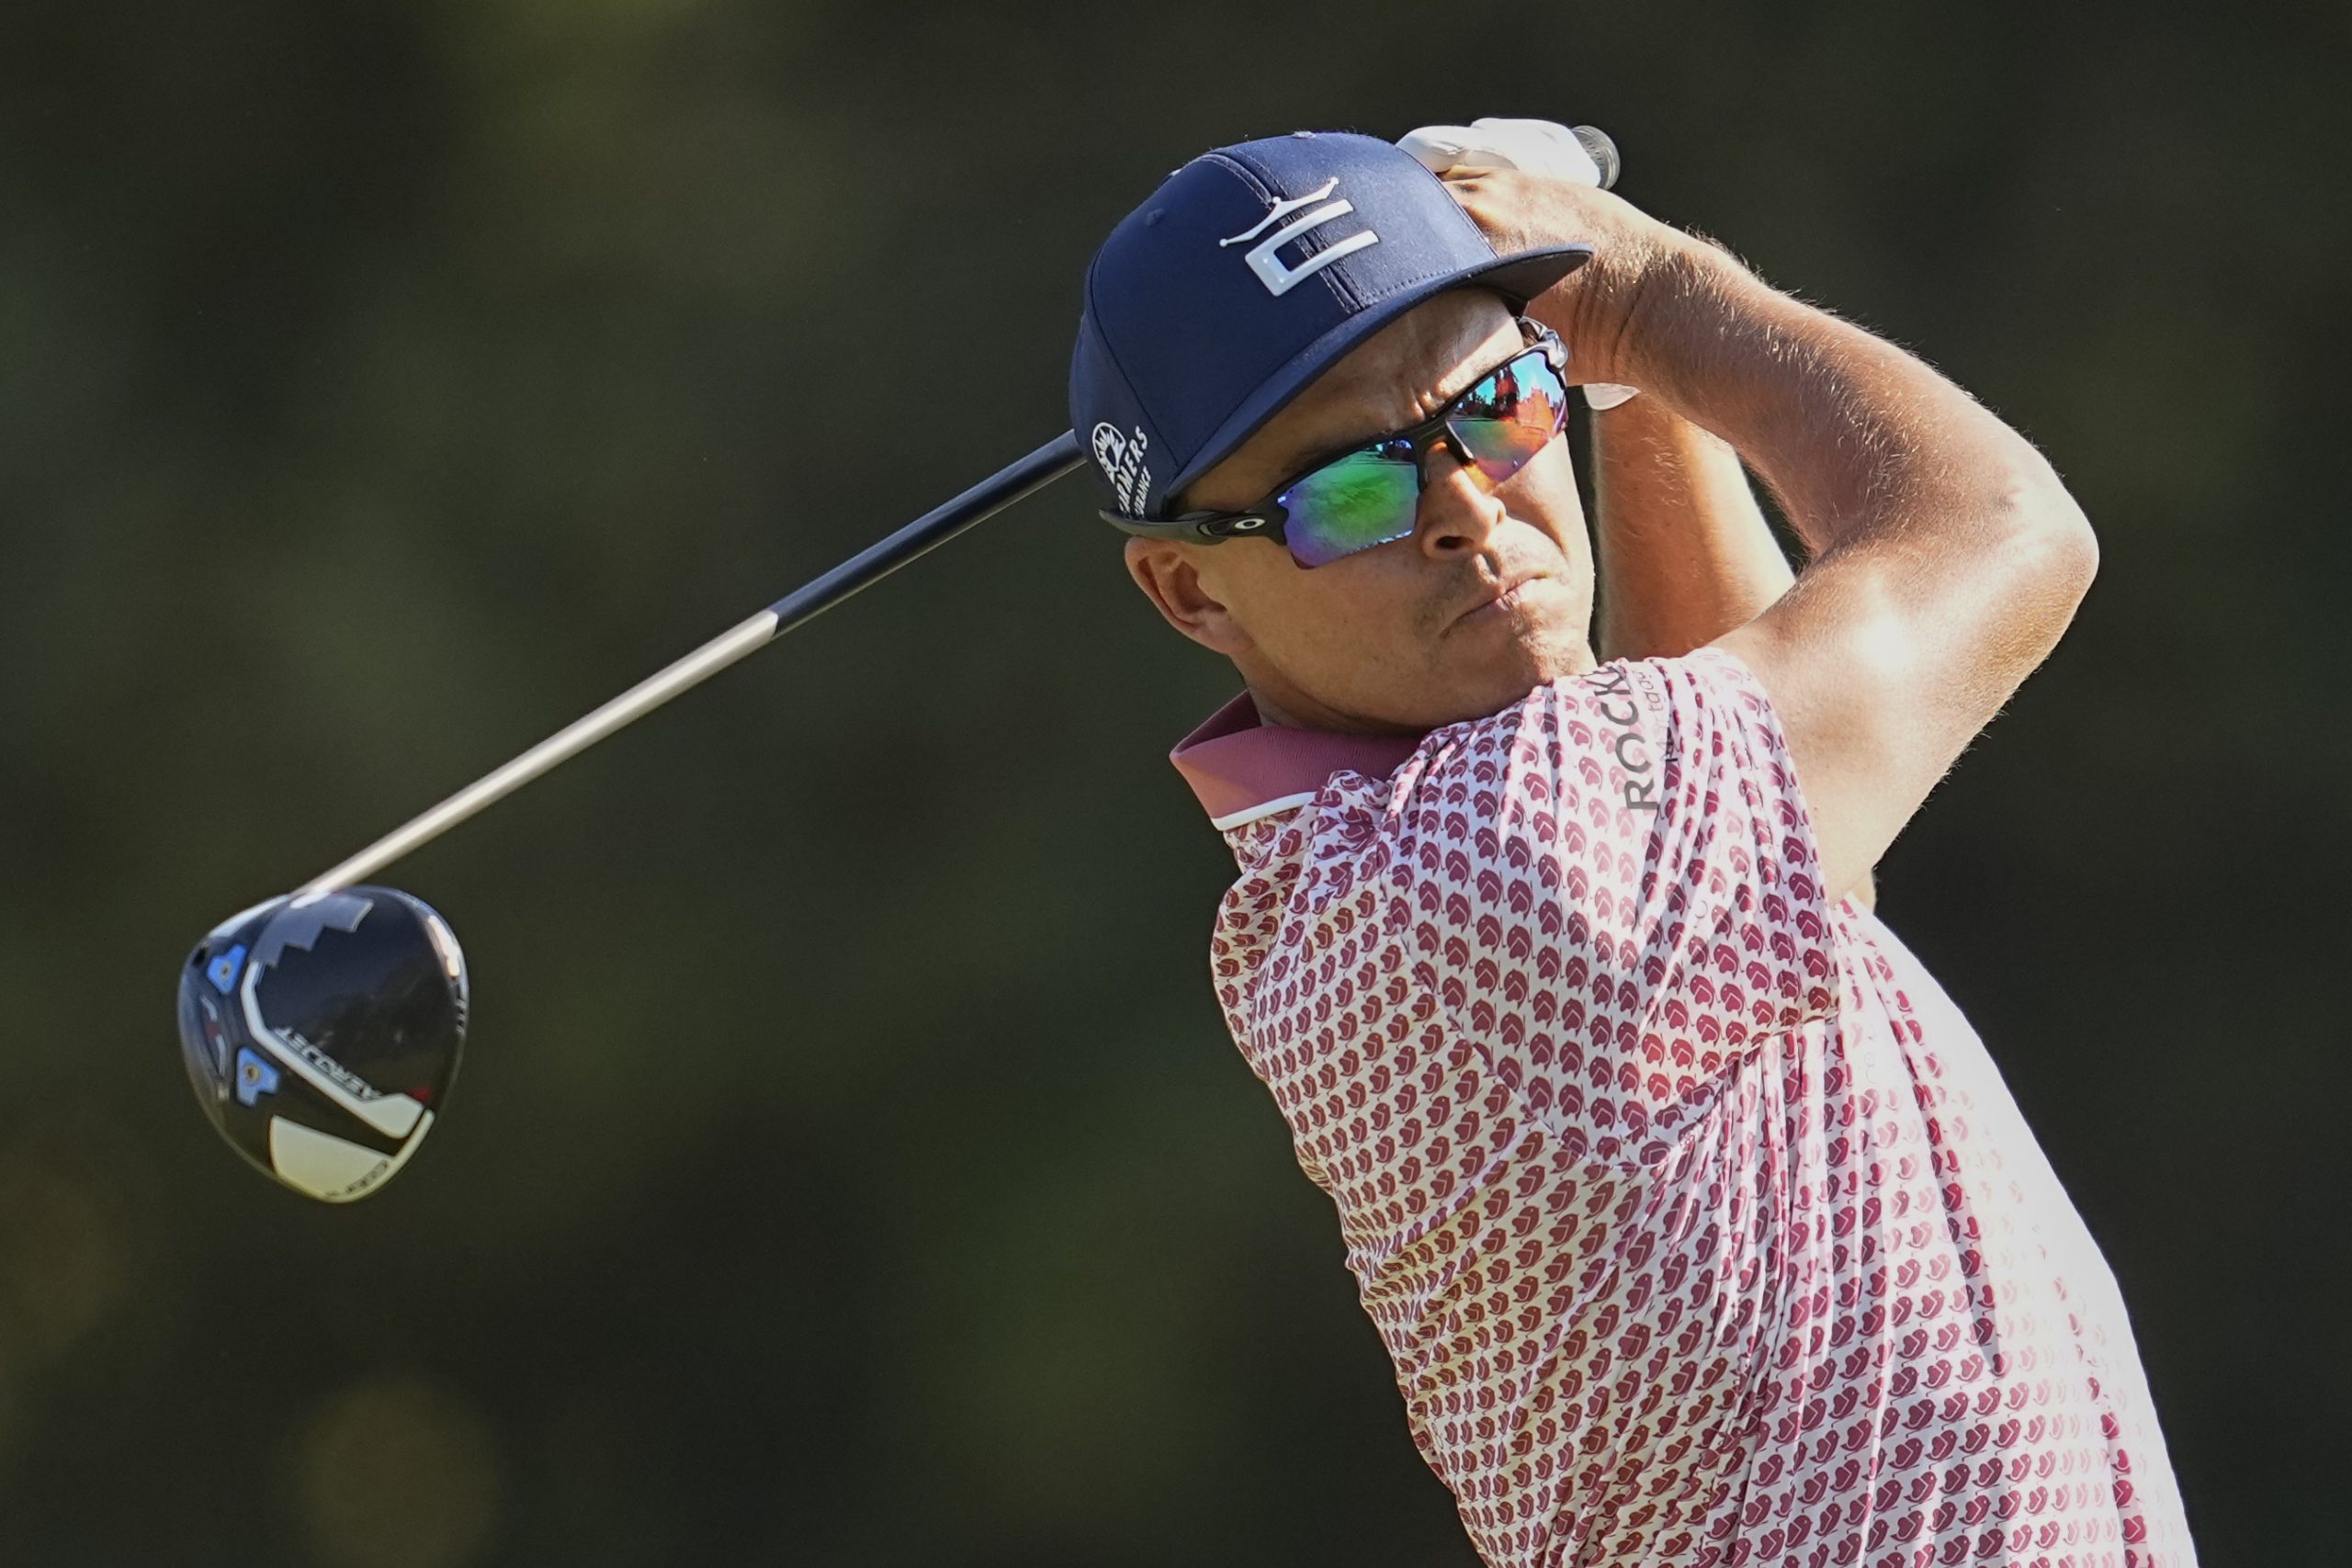 US Open Wrap: Rickie Fowler nails 70 foot putt, shares lead with Wyndham Clark